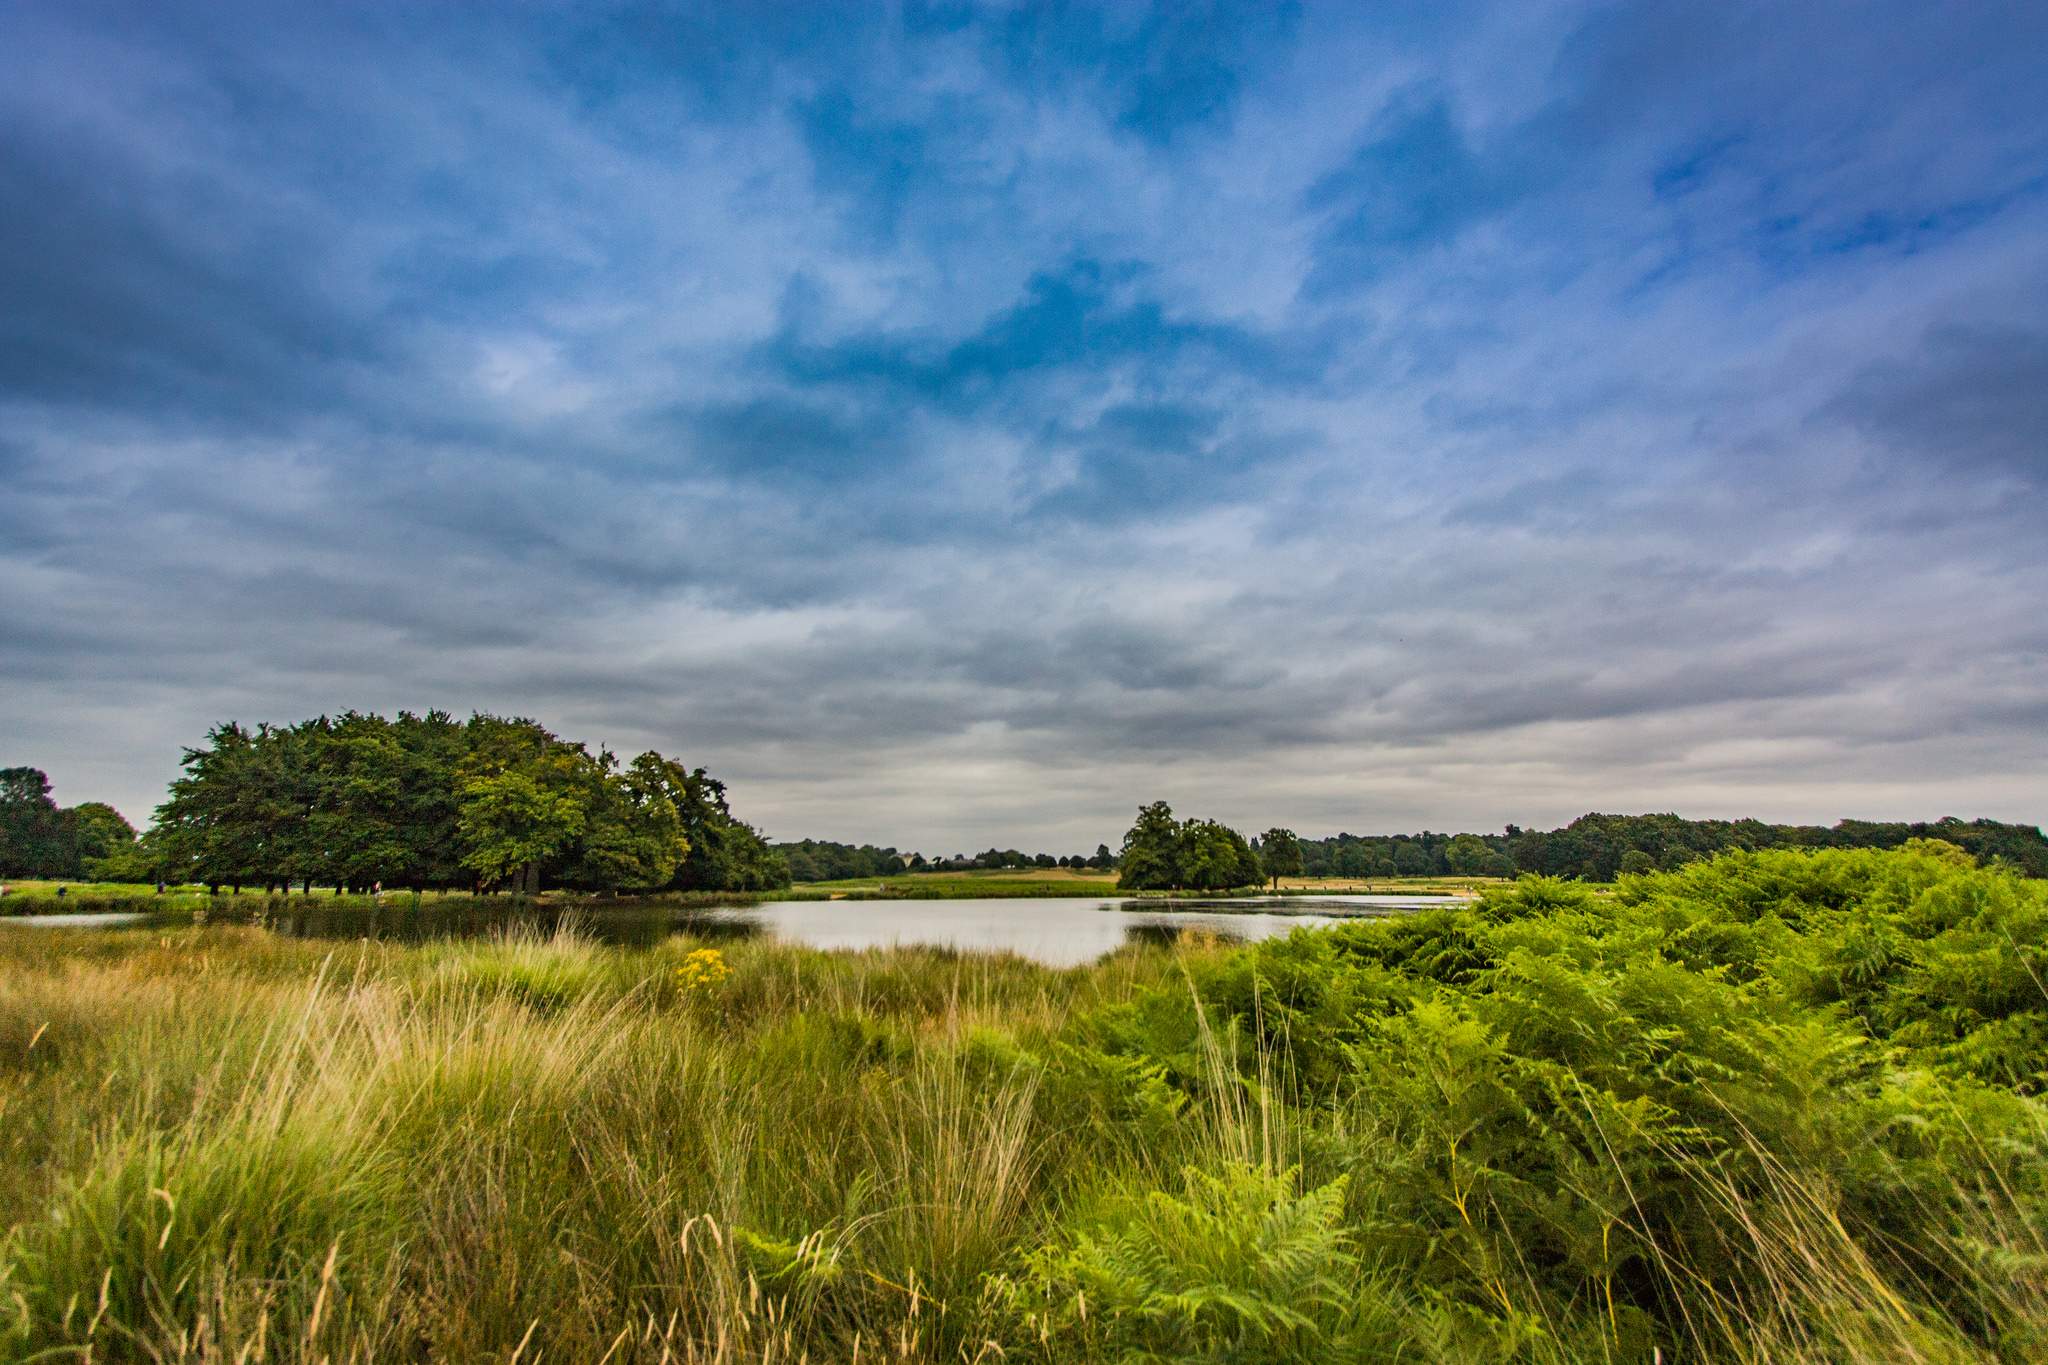 One of the many stunning views in Richmond Park, London